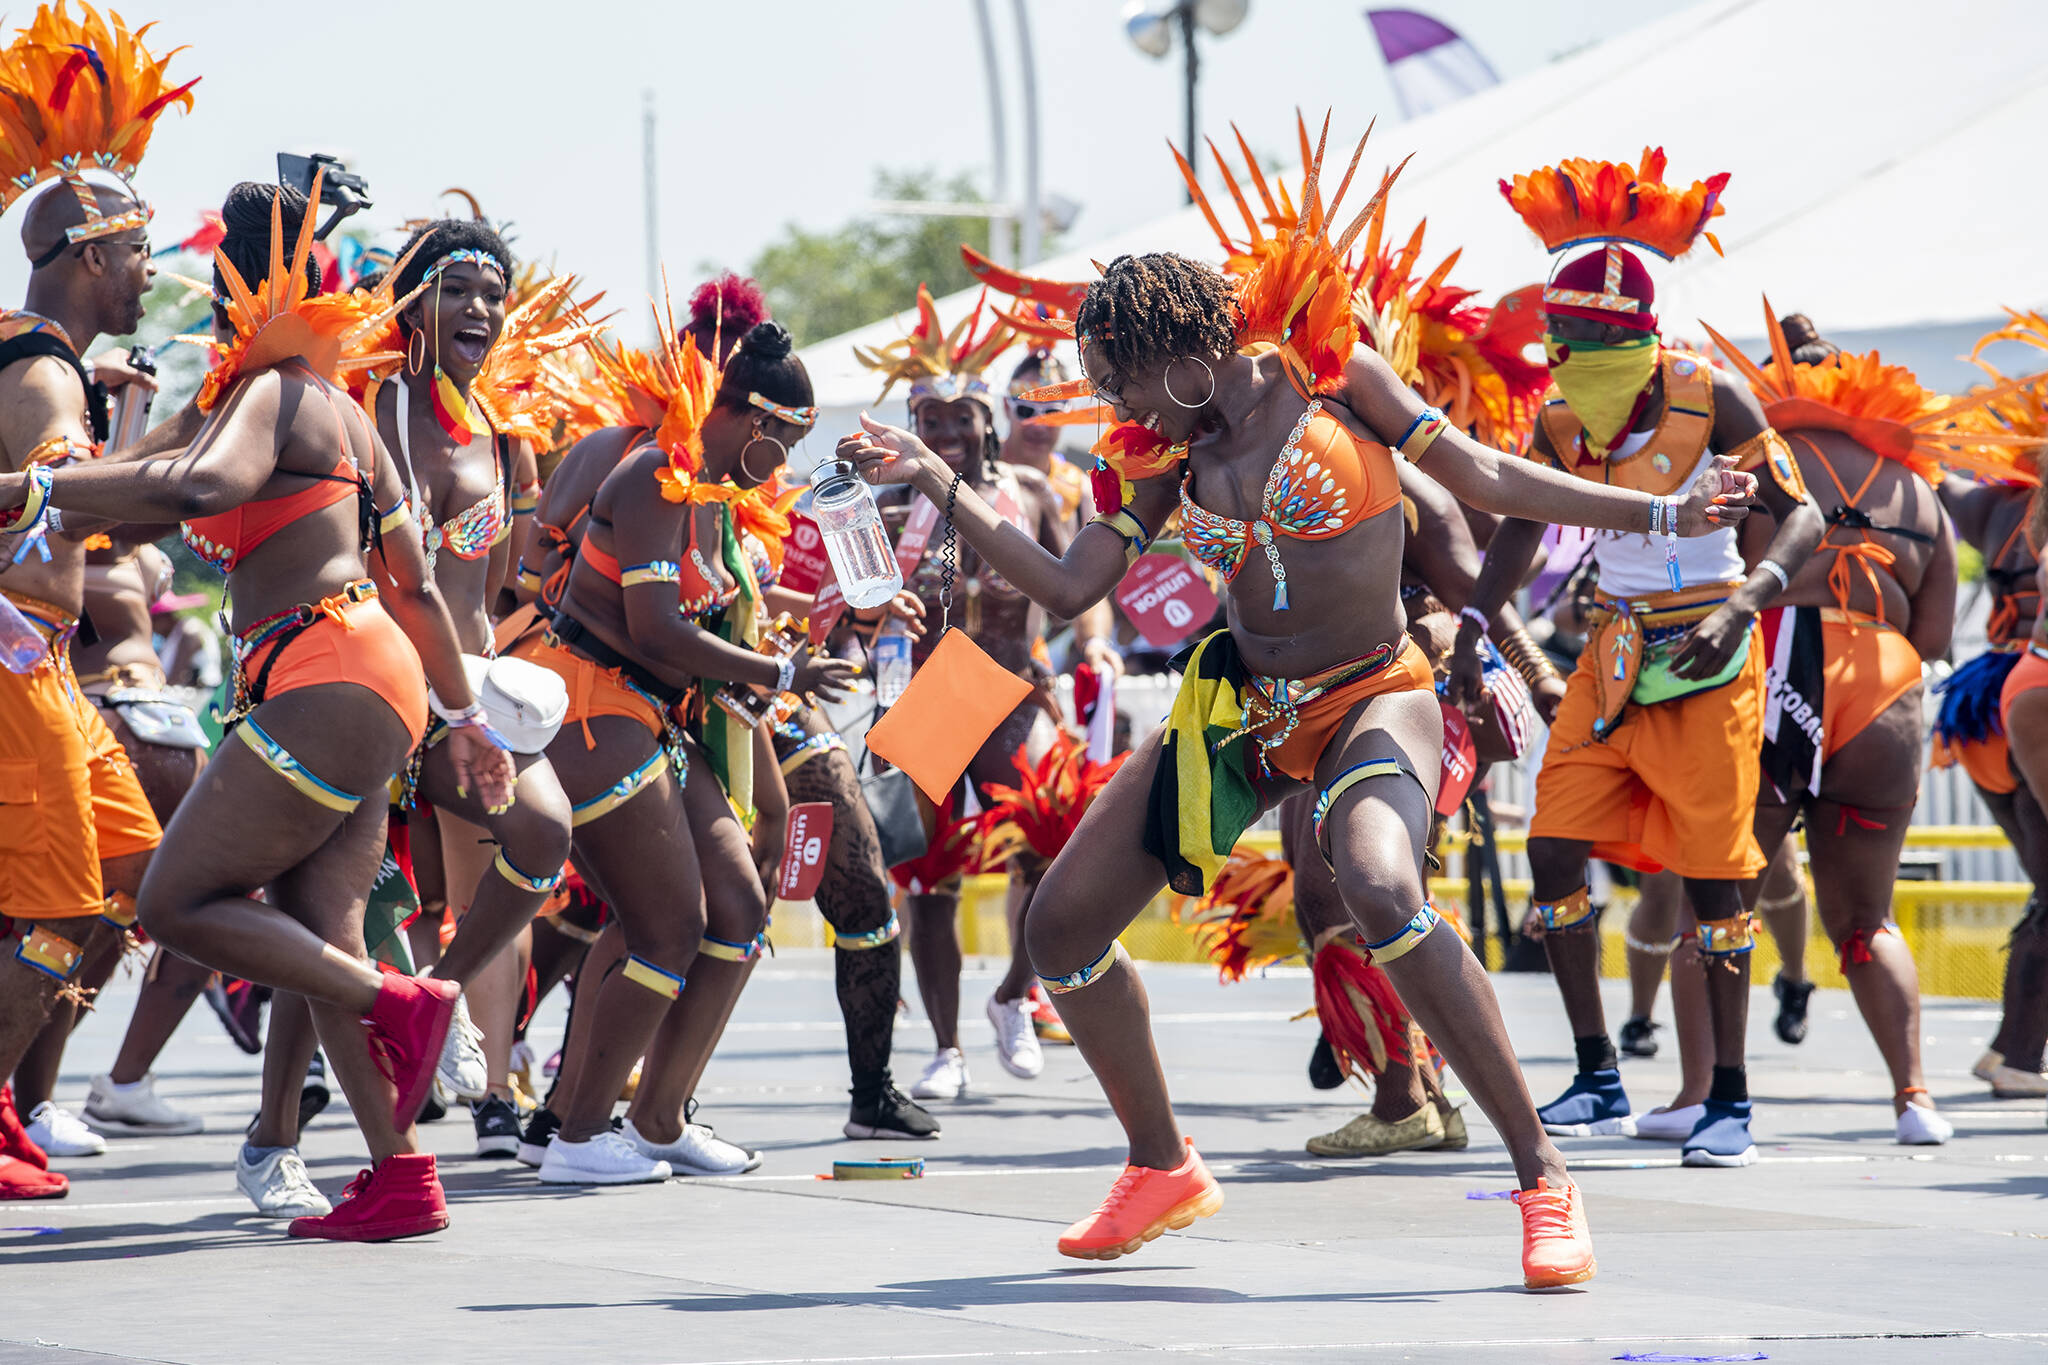 The Toronto Caribbean Carnival is about more than just the